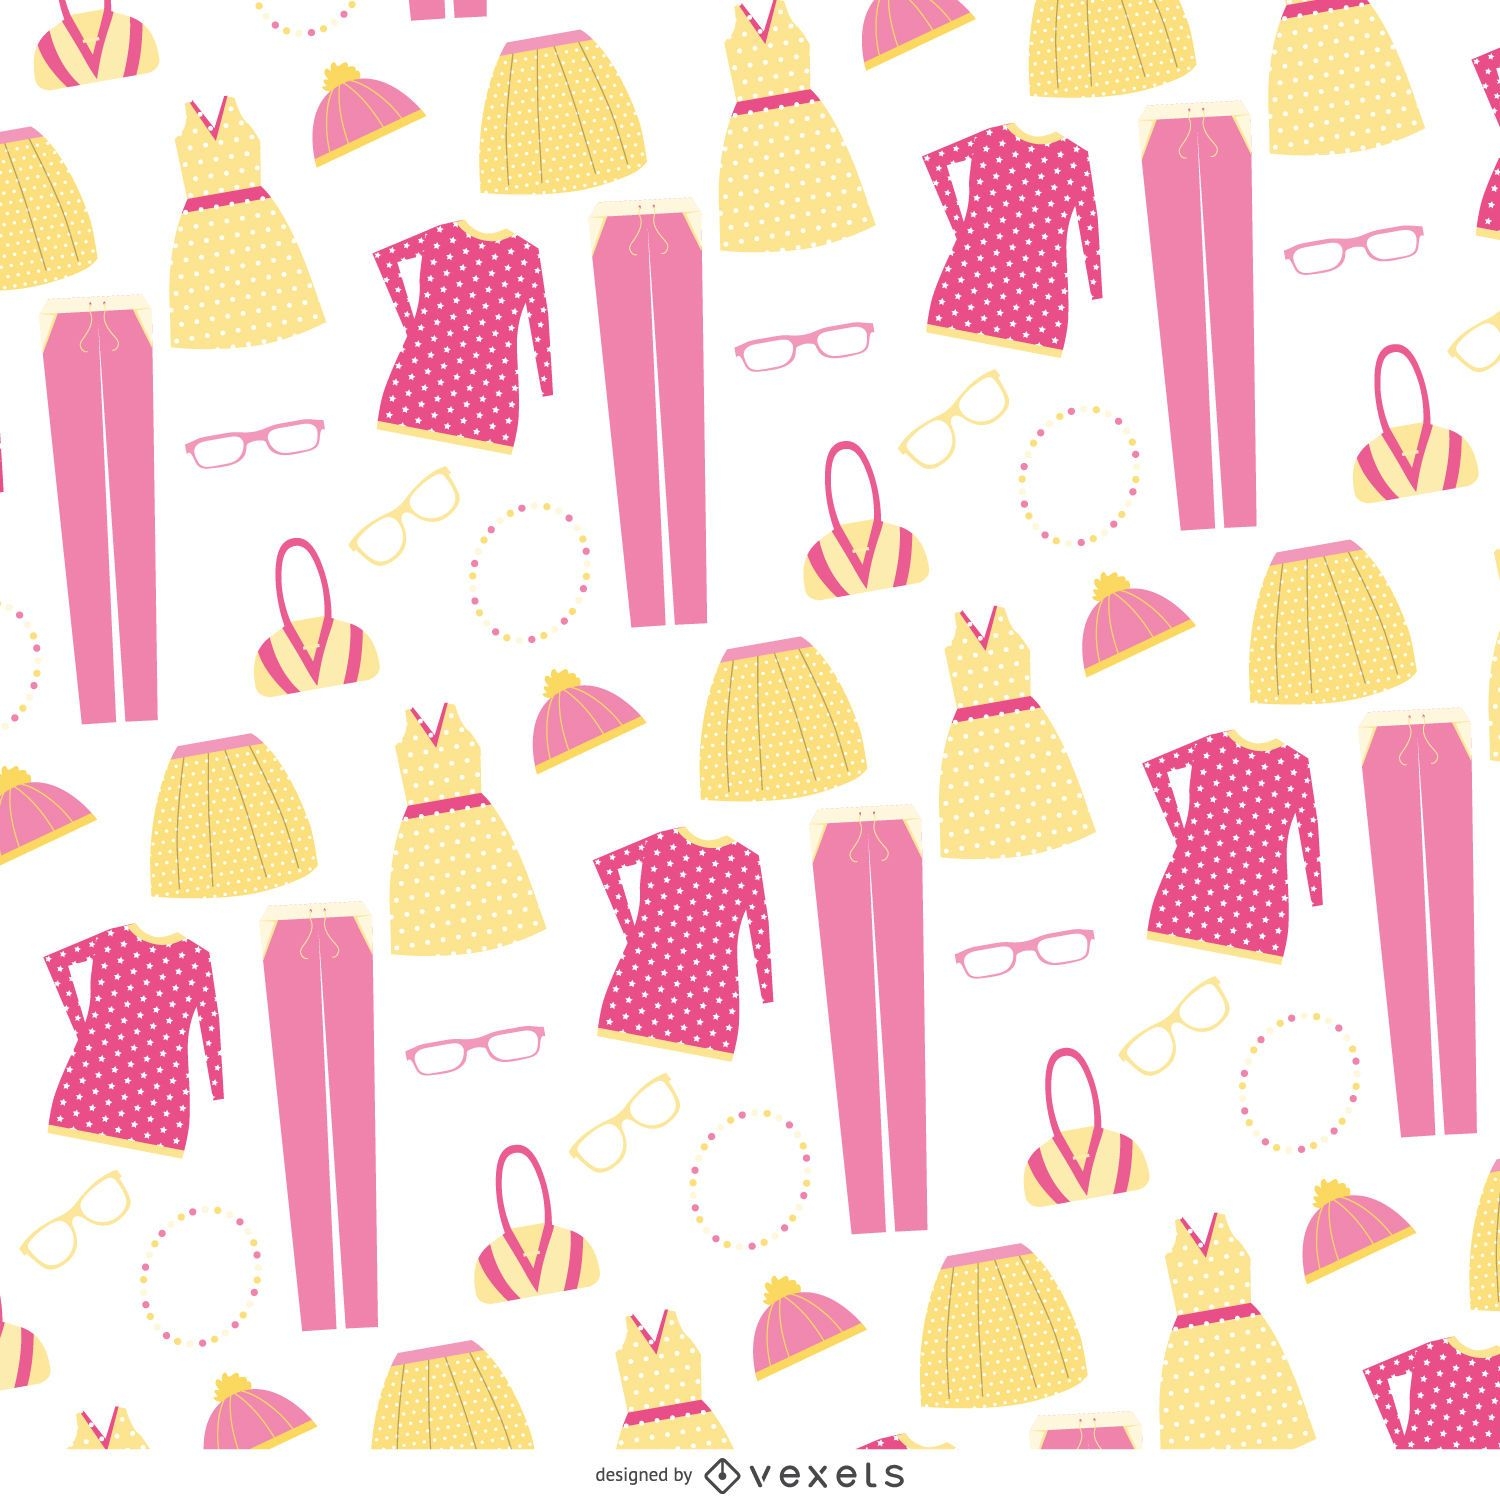 Clothing items pattern